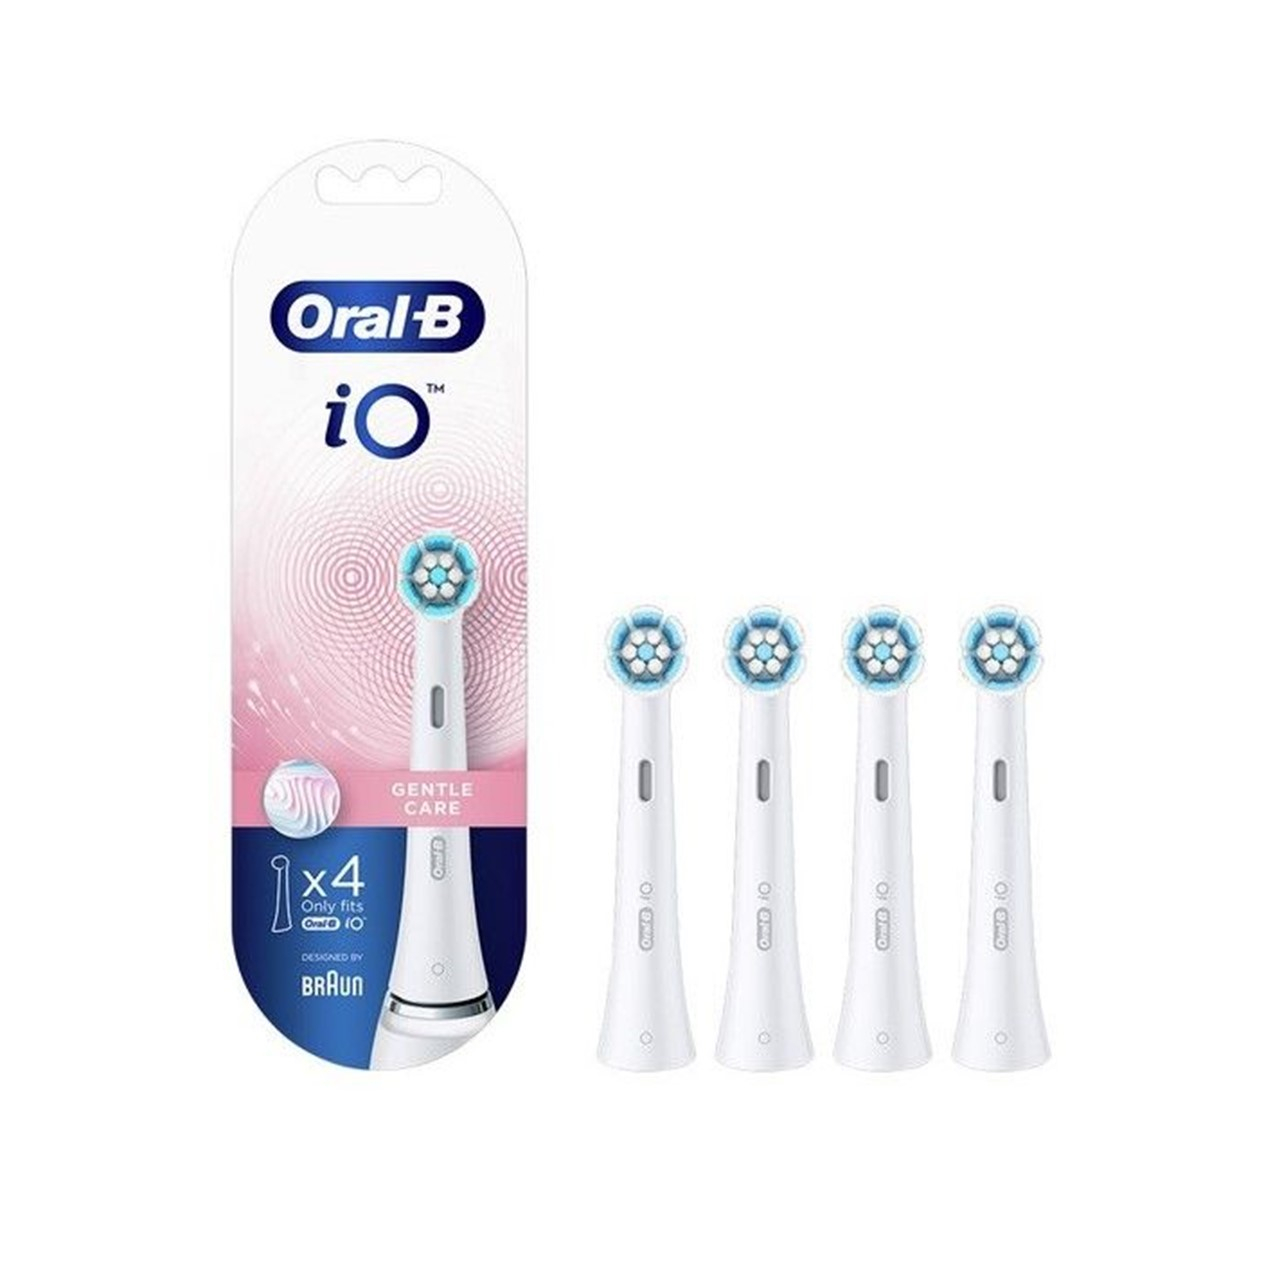 Oral-B iO Gentle Care Replacement Head Electric Toothbrush White x4